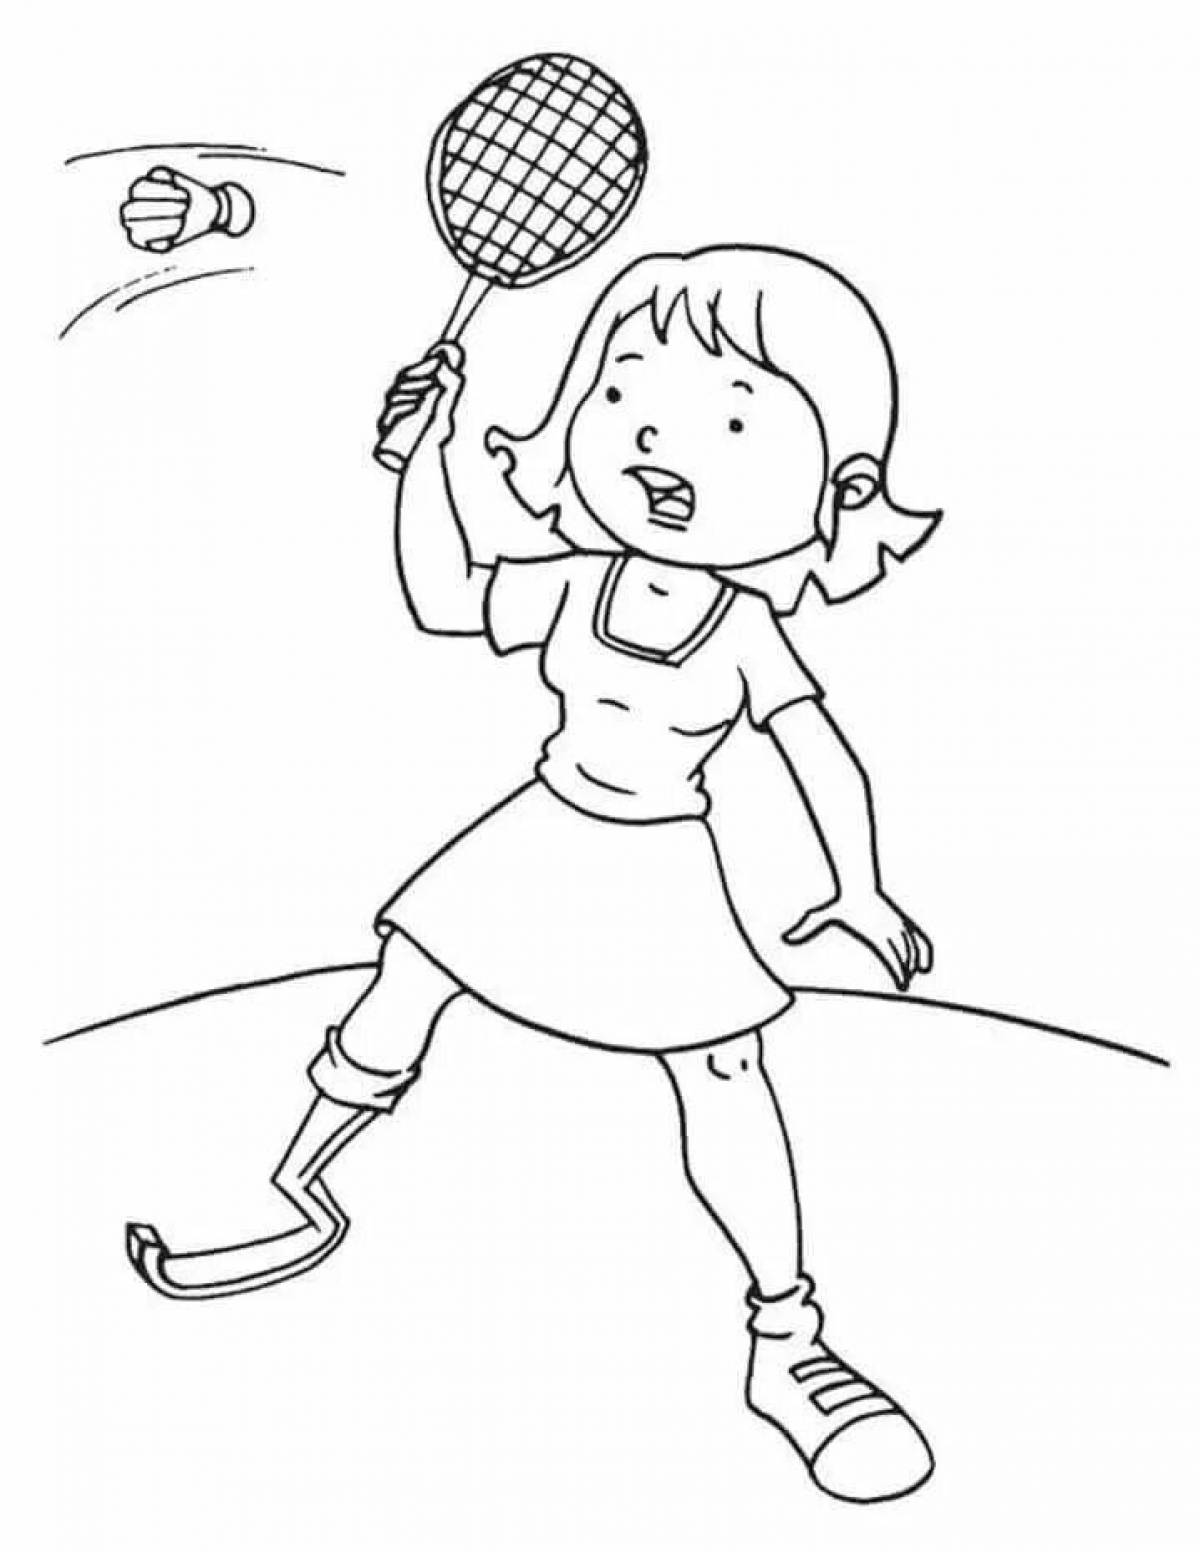 Fun sports coloring pages